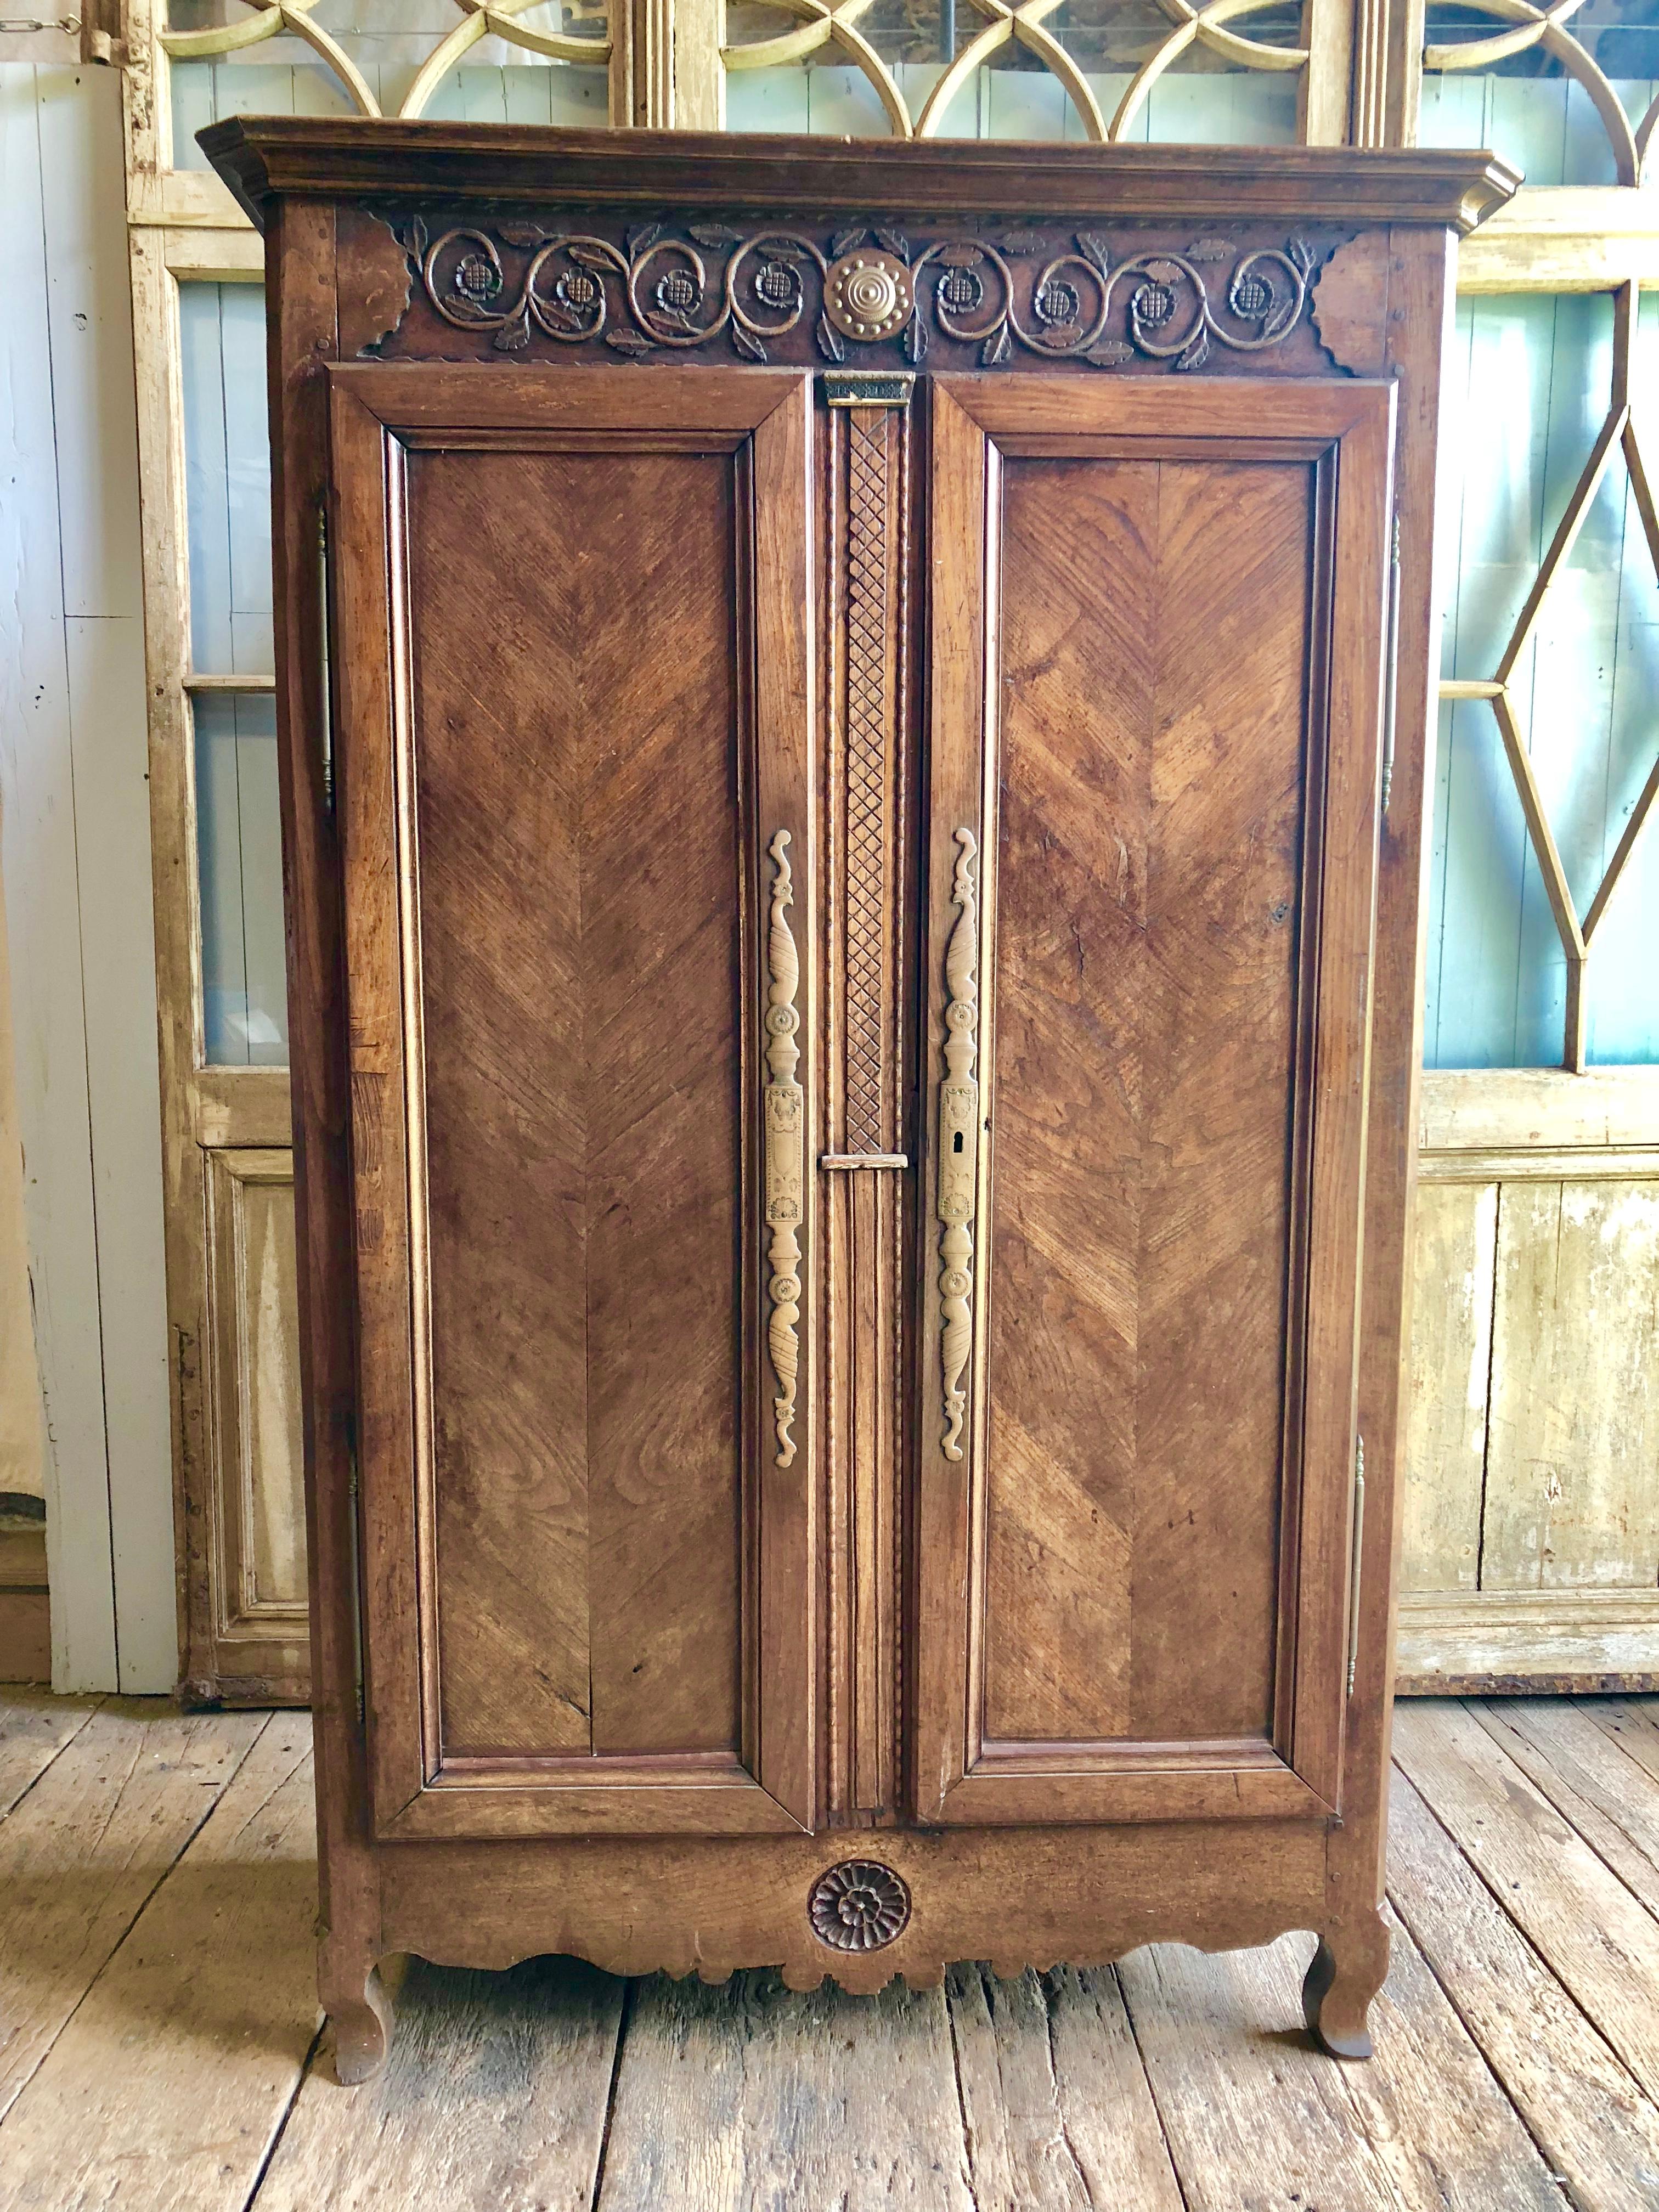 A French Provincial (probably Bresse) Louis XV armoire in elm, with nicely carved upper and lower panels, 2 chevron-paneled full length doors on short cabriole feet, circa 1780. The painted interior has removable shelves.